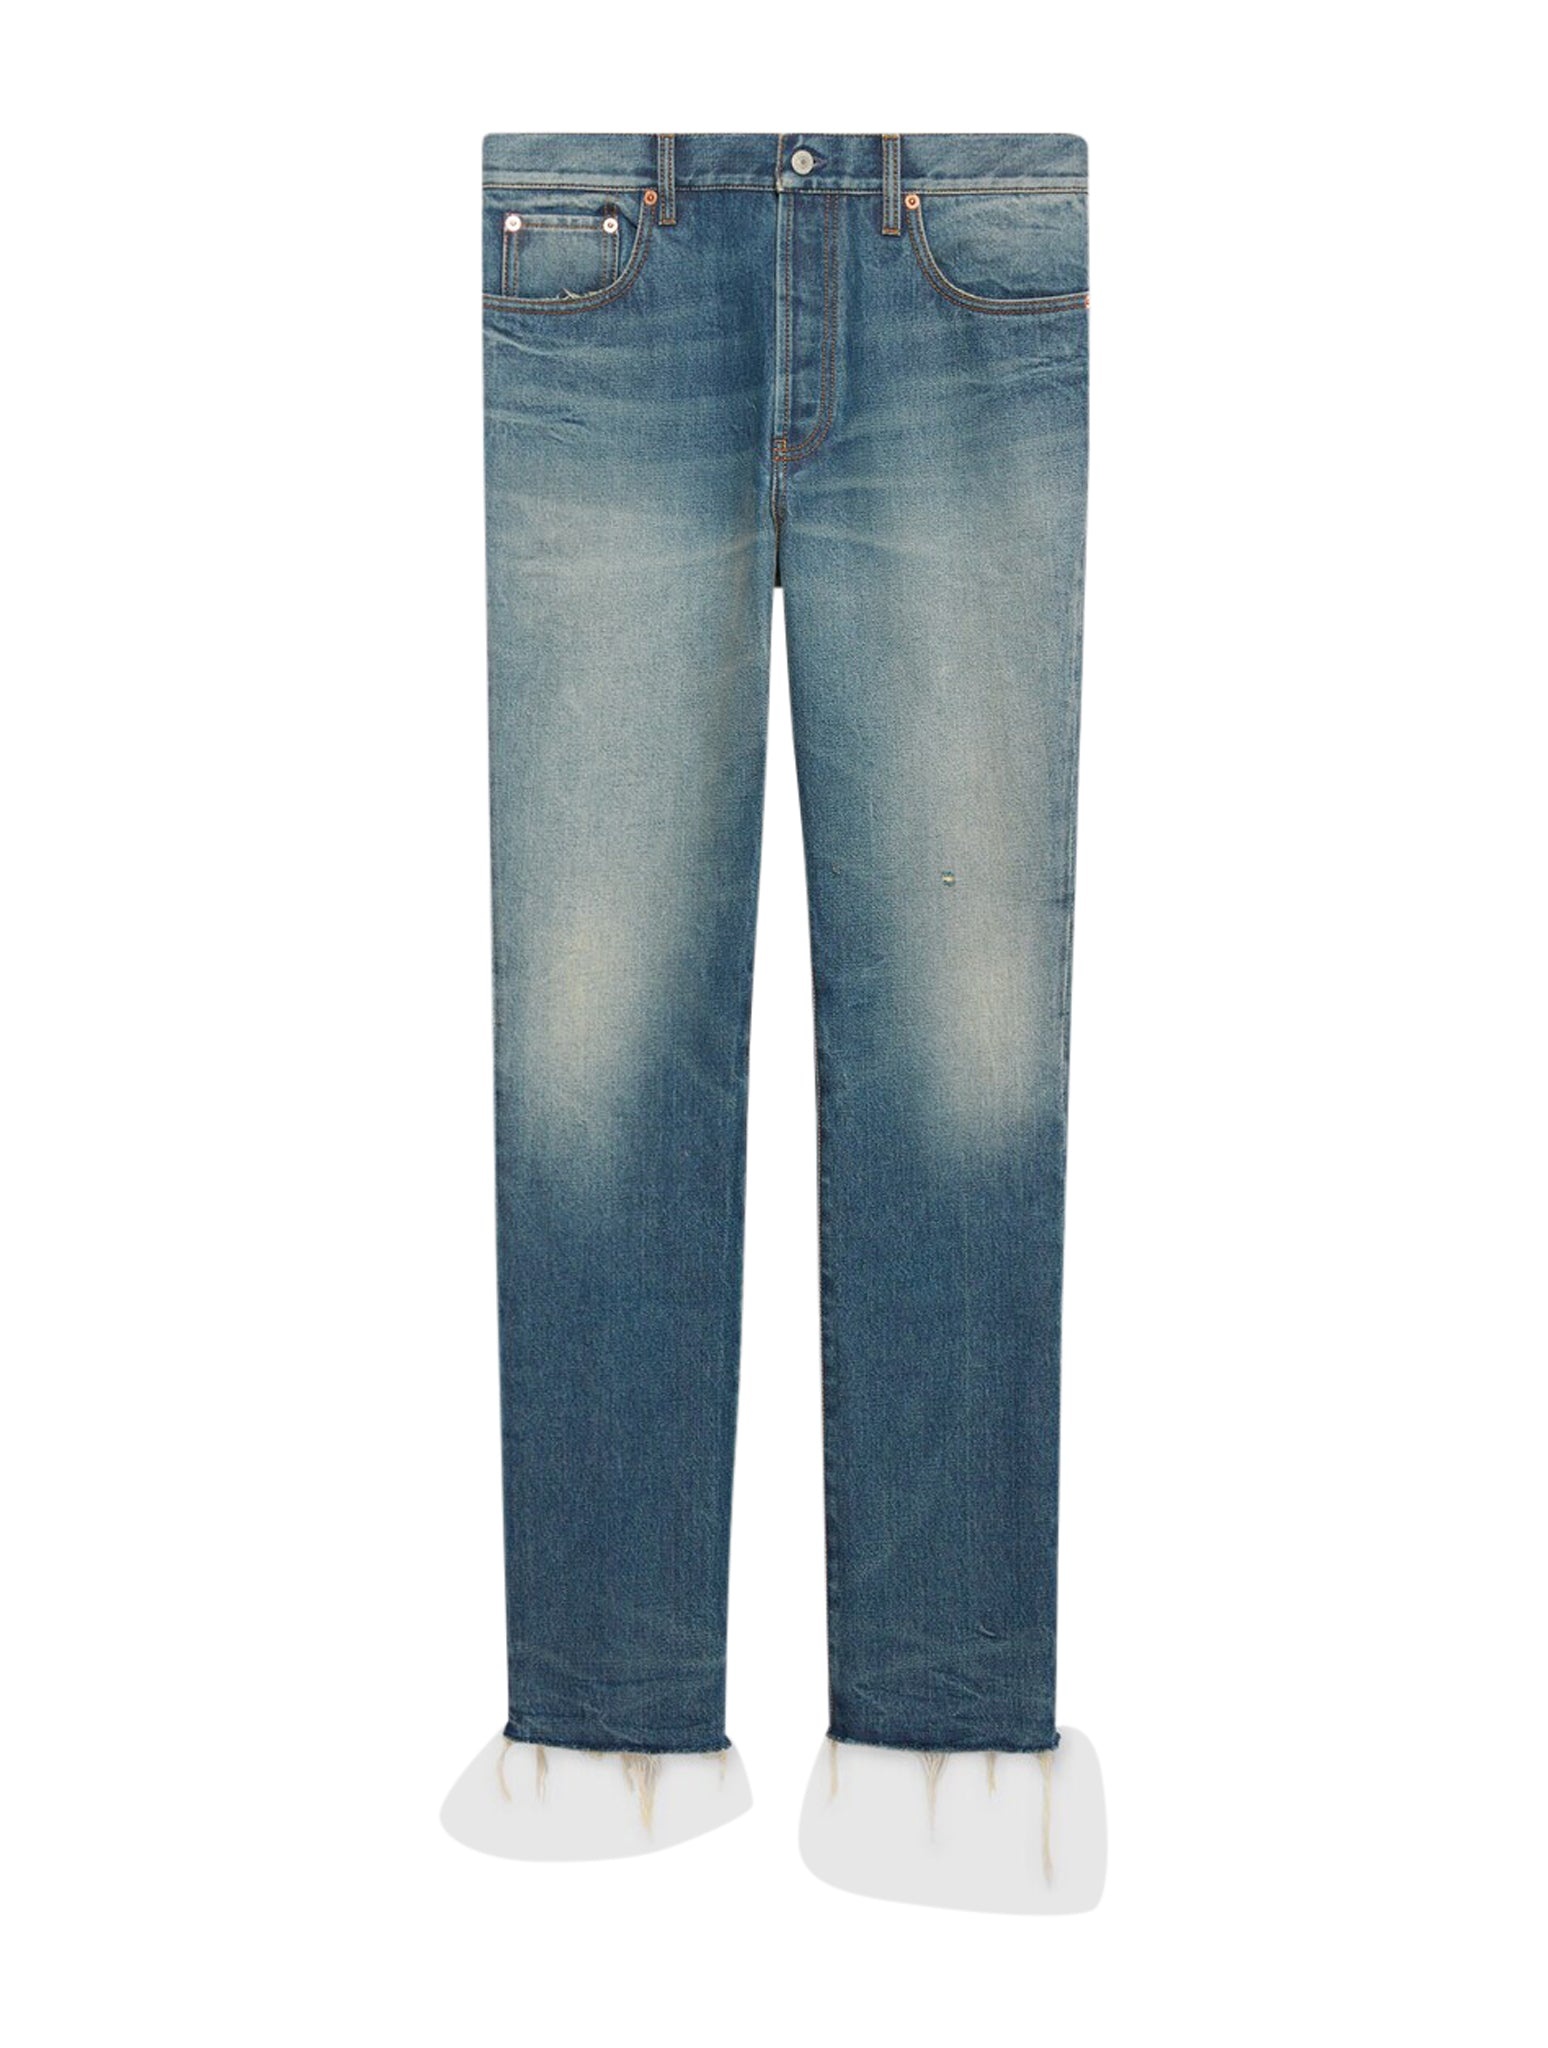 DENIM TROUSERS WITH LABEL - 2